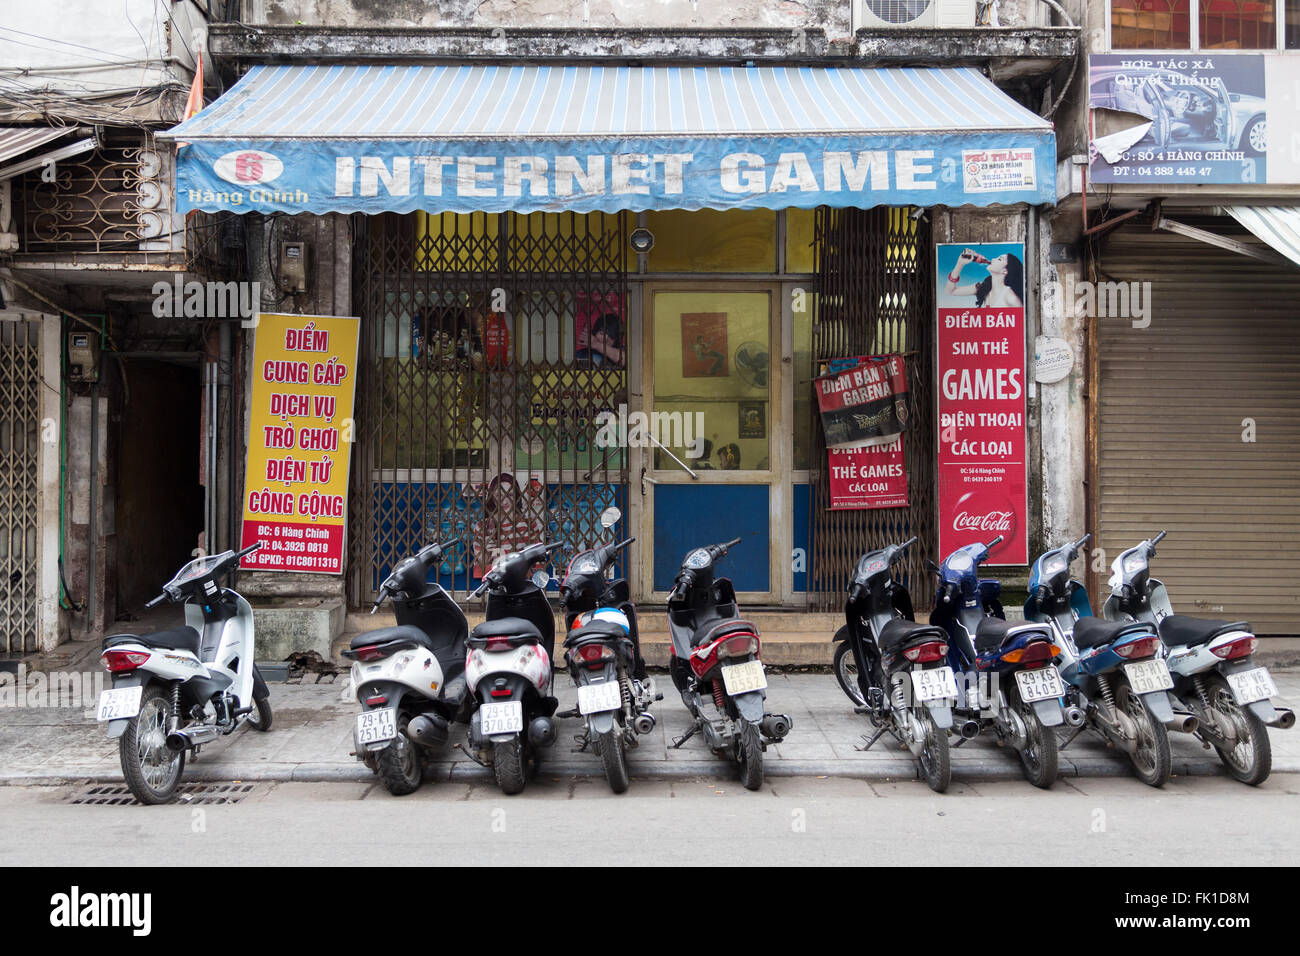 Exterior of an internet café in Hanoi Vietnam, early in the morning. People inside must have been there all night. Stock Photo